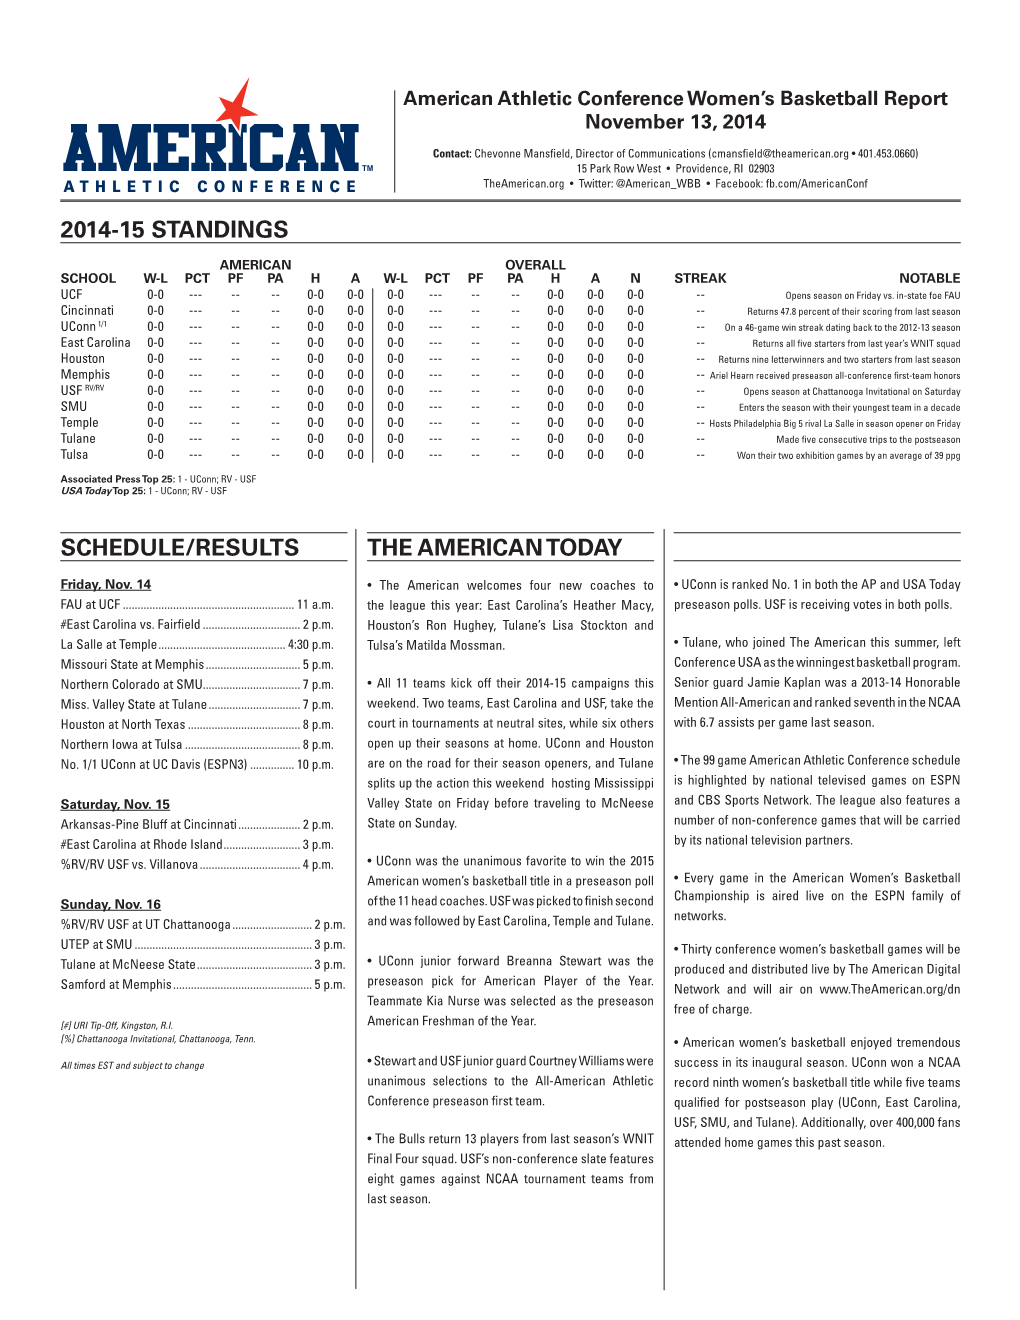 The American Today Schedule/Results 2014-15